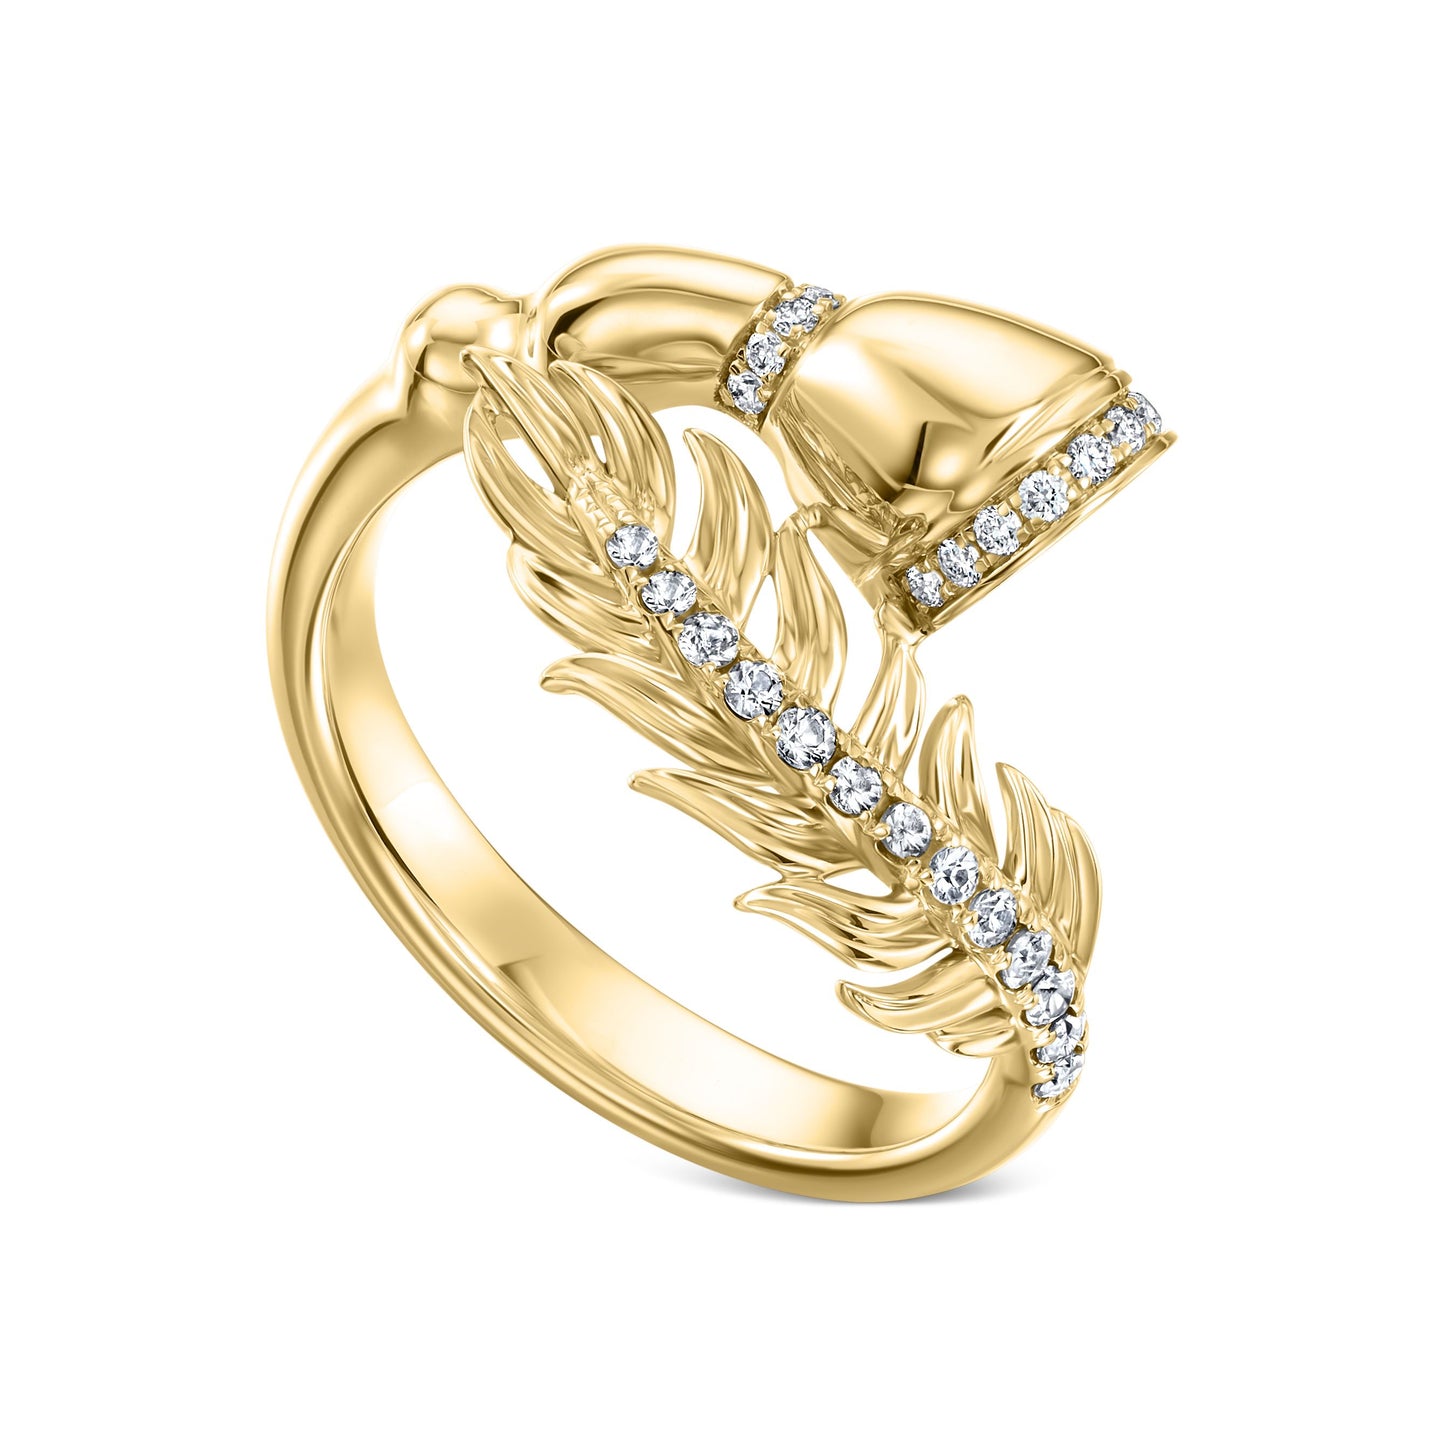 Fearless Feathers Yellow Gold and Diamonds Ring